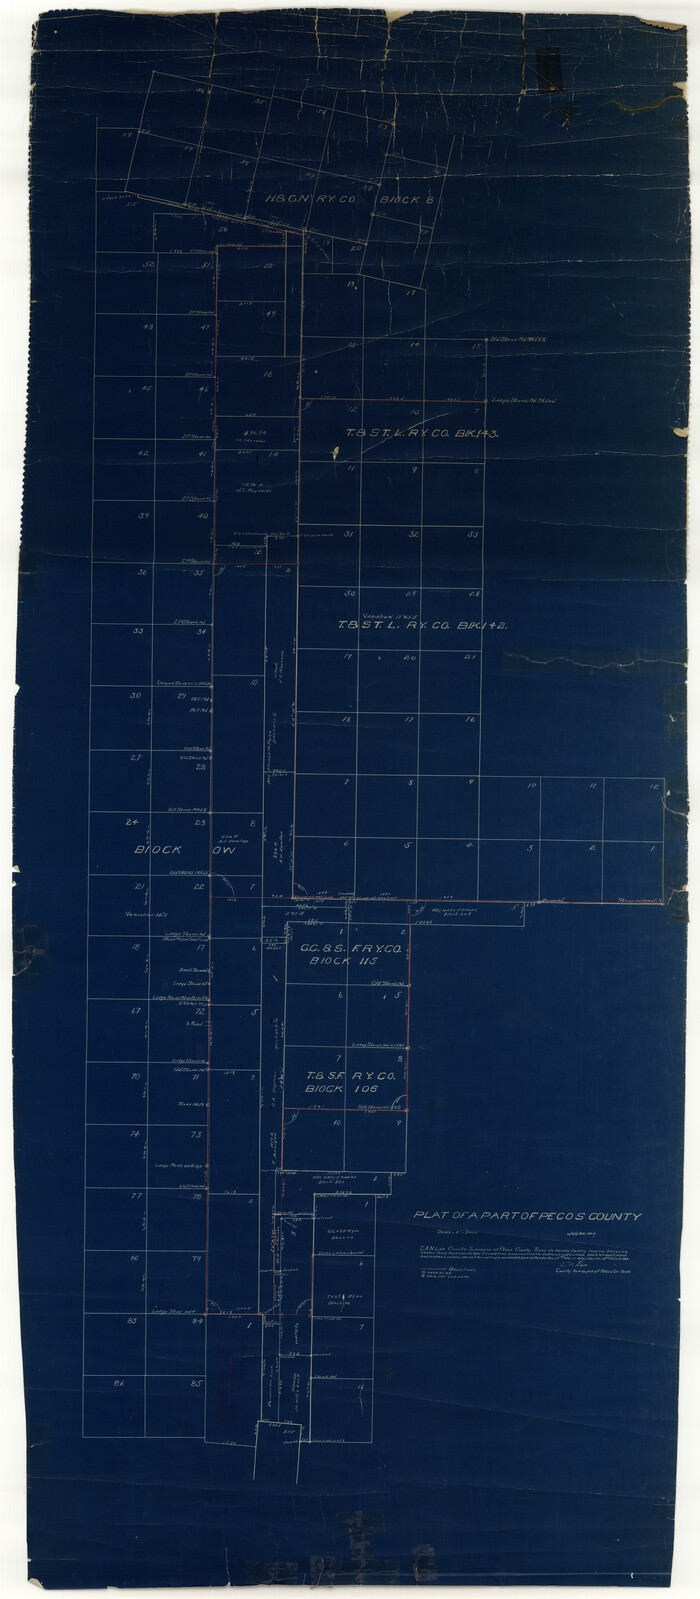 9708, Pecos County Rolled Sketch 70, General Map Collection